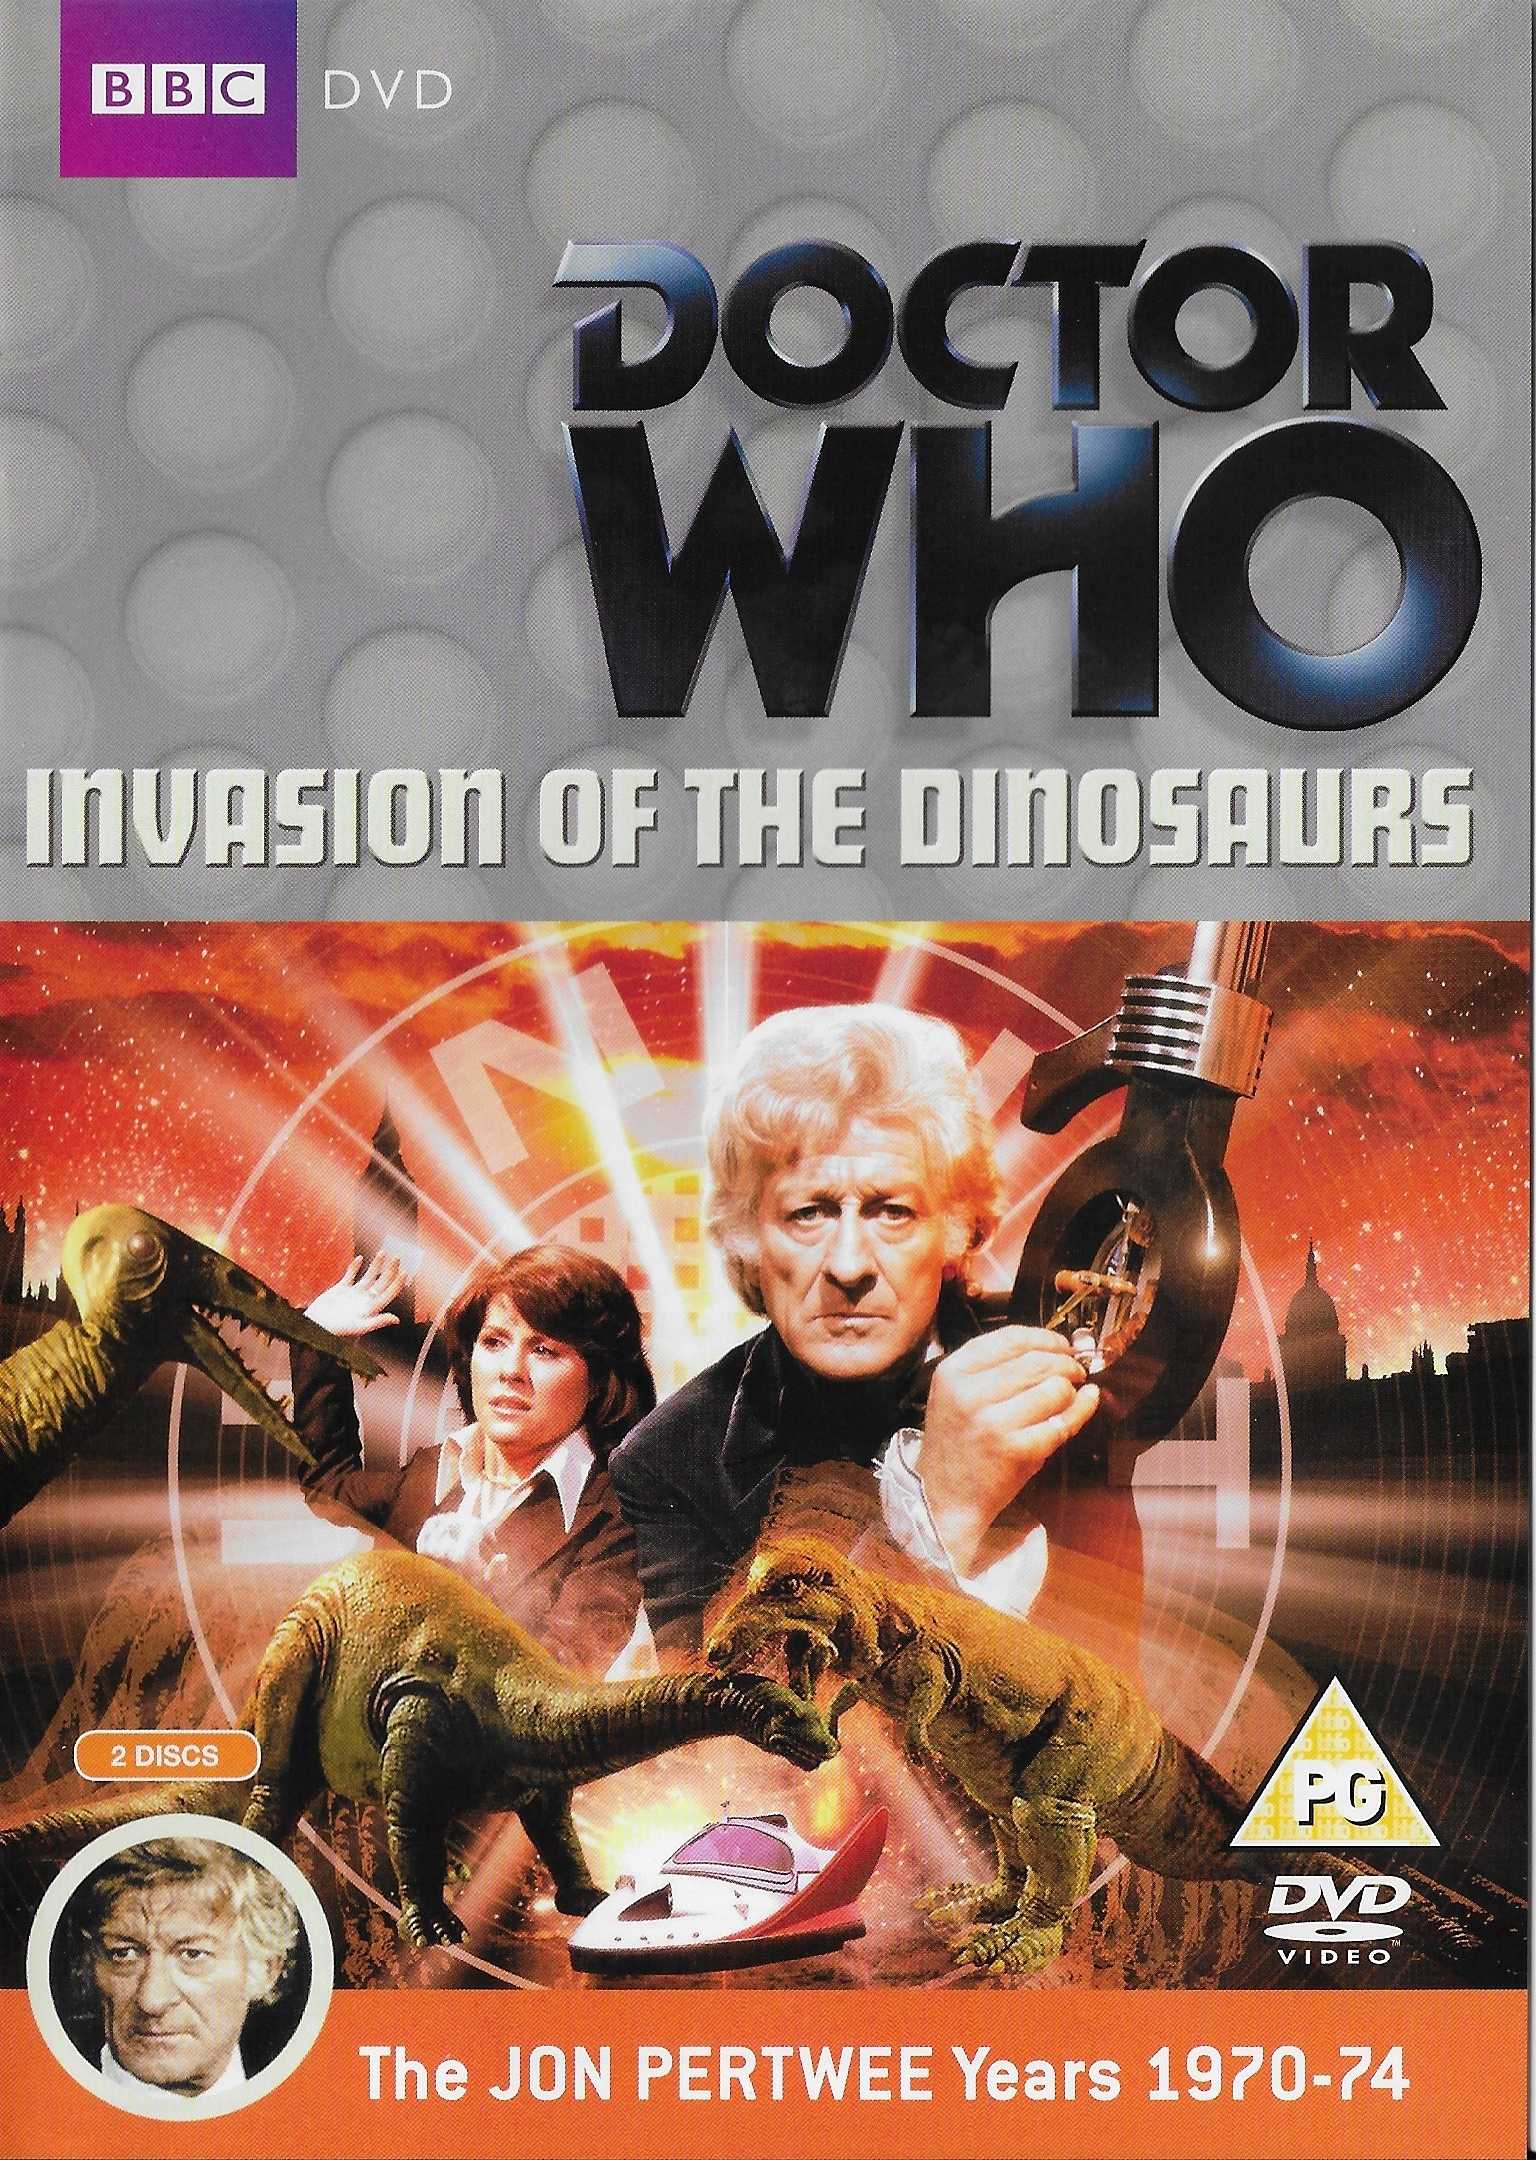 Picture of BBCDVD 3376A Doctor Who - Invasion of the dinosaurs by artist Malcolm Hulke from the BBC records and Tapes library